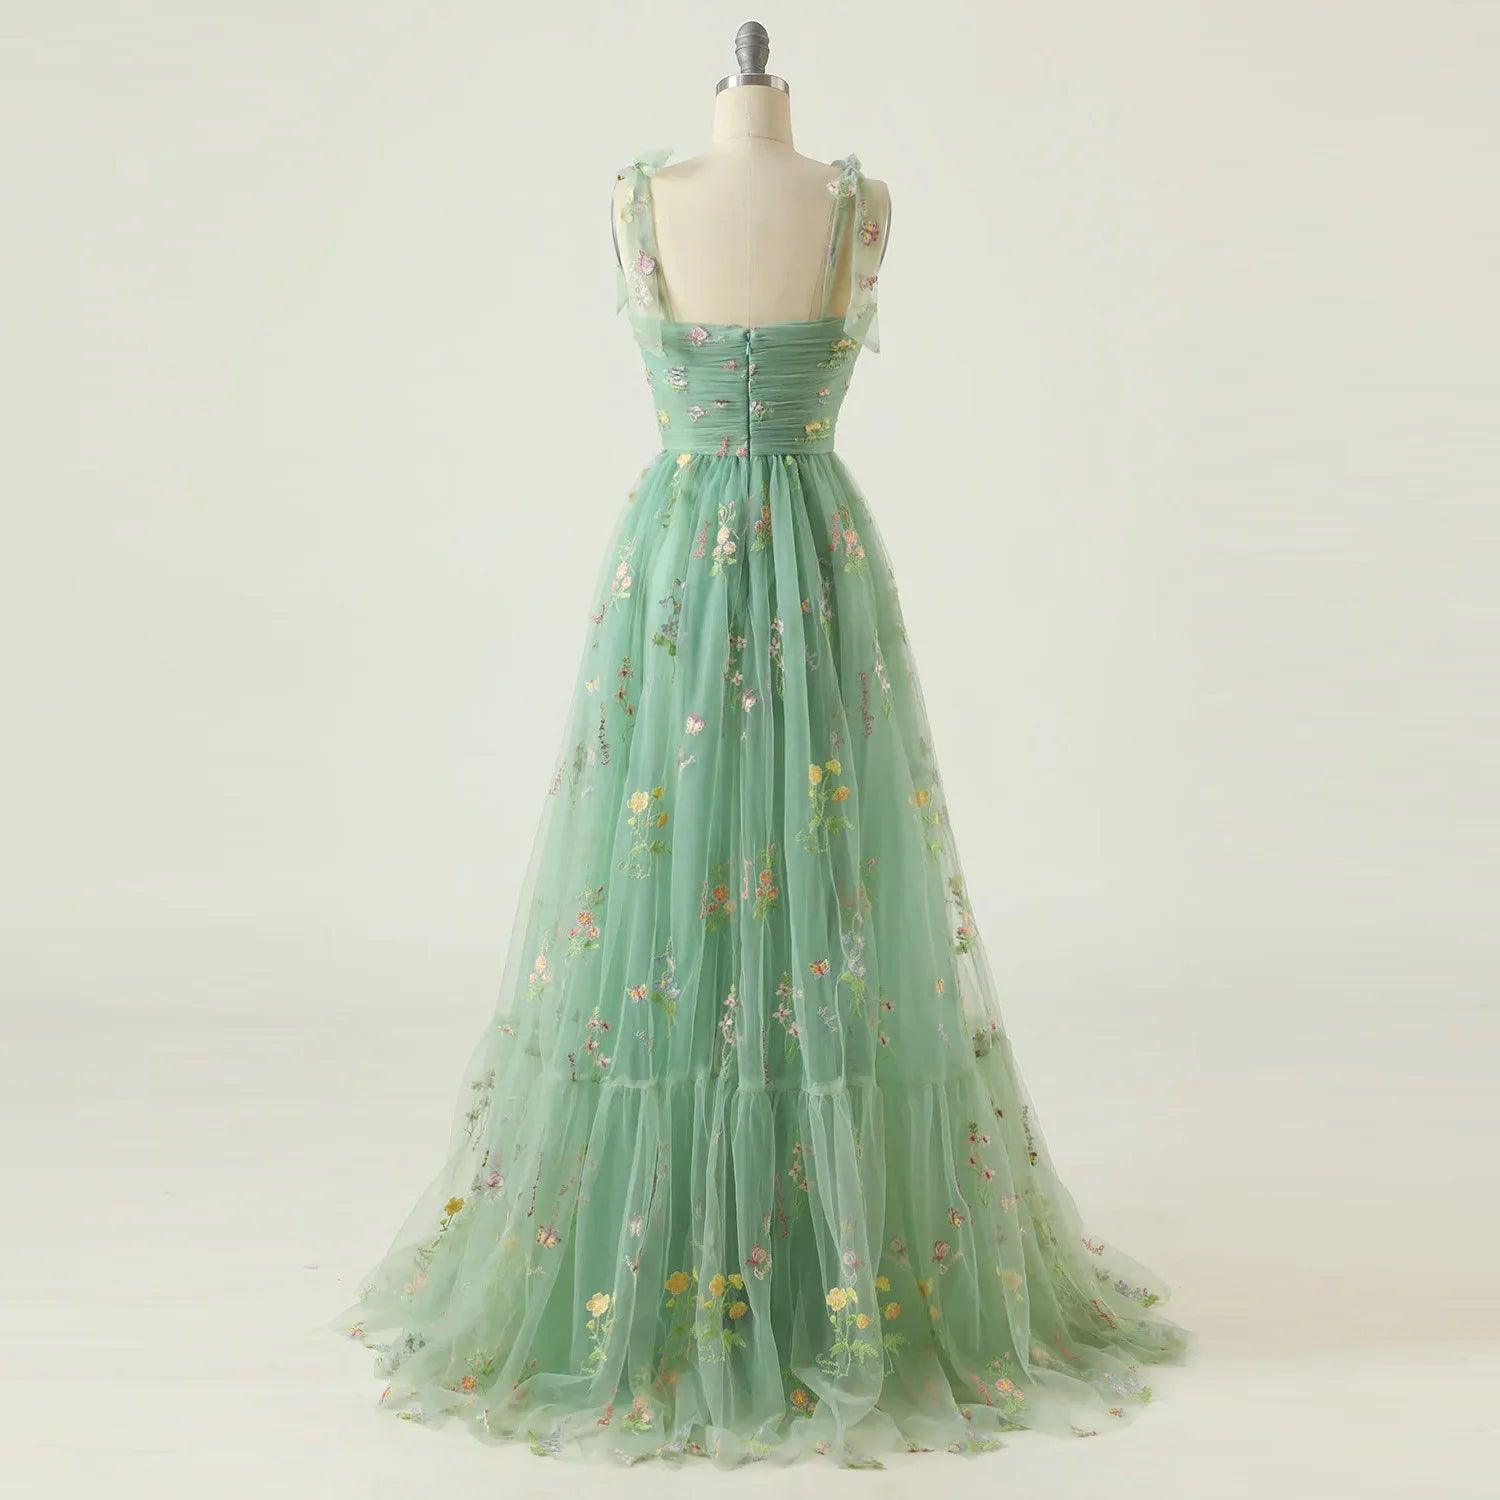 Elegant Mint Green Tulle Tea-Length Party Dress with Adjustable Straps  ourlum.com   